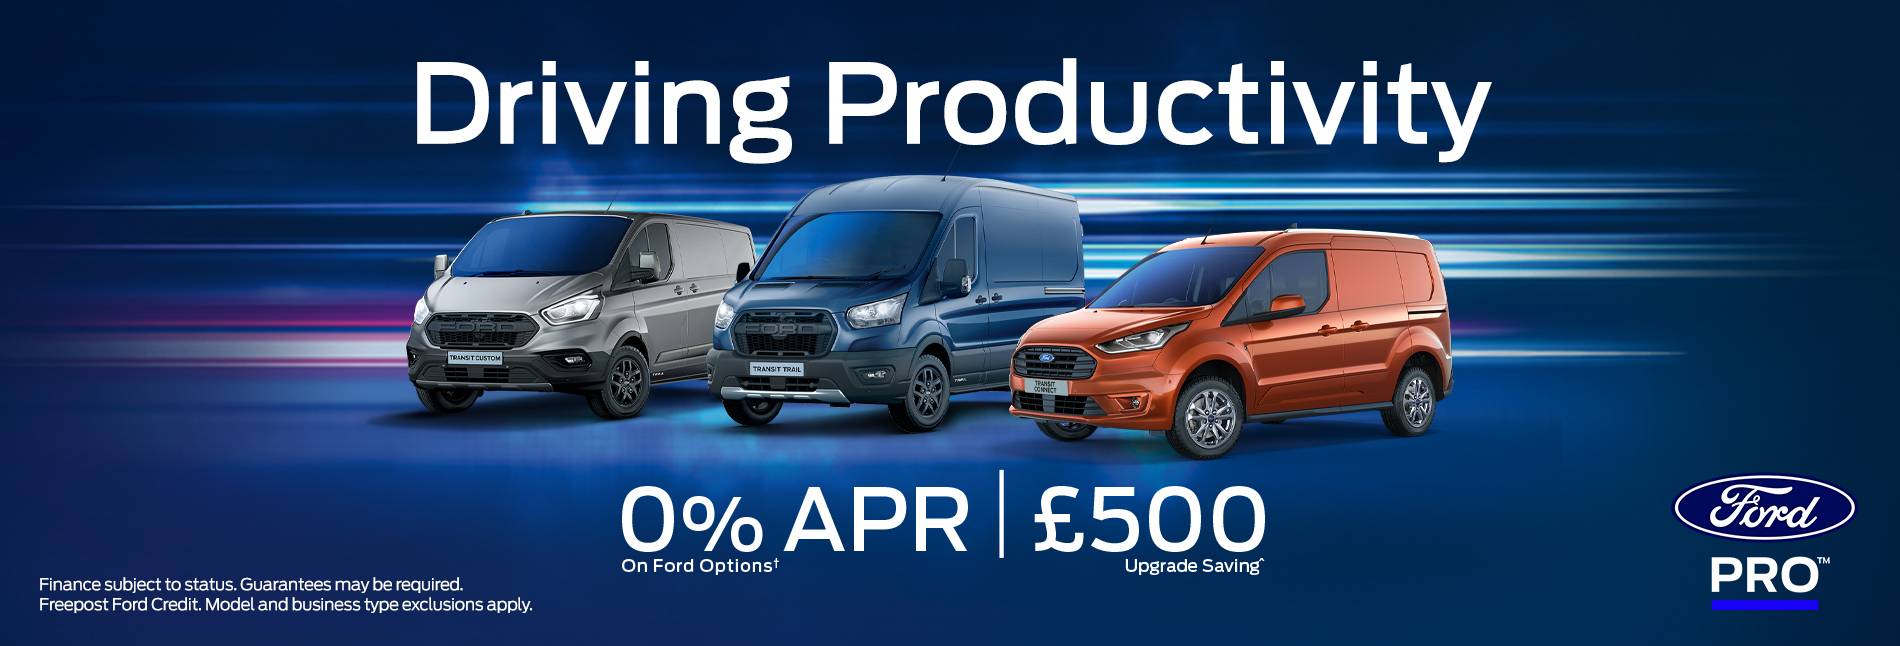 0% APR on Ford vehicles